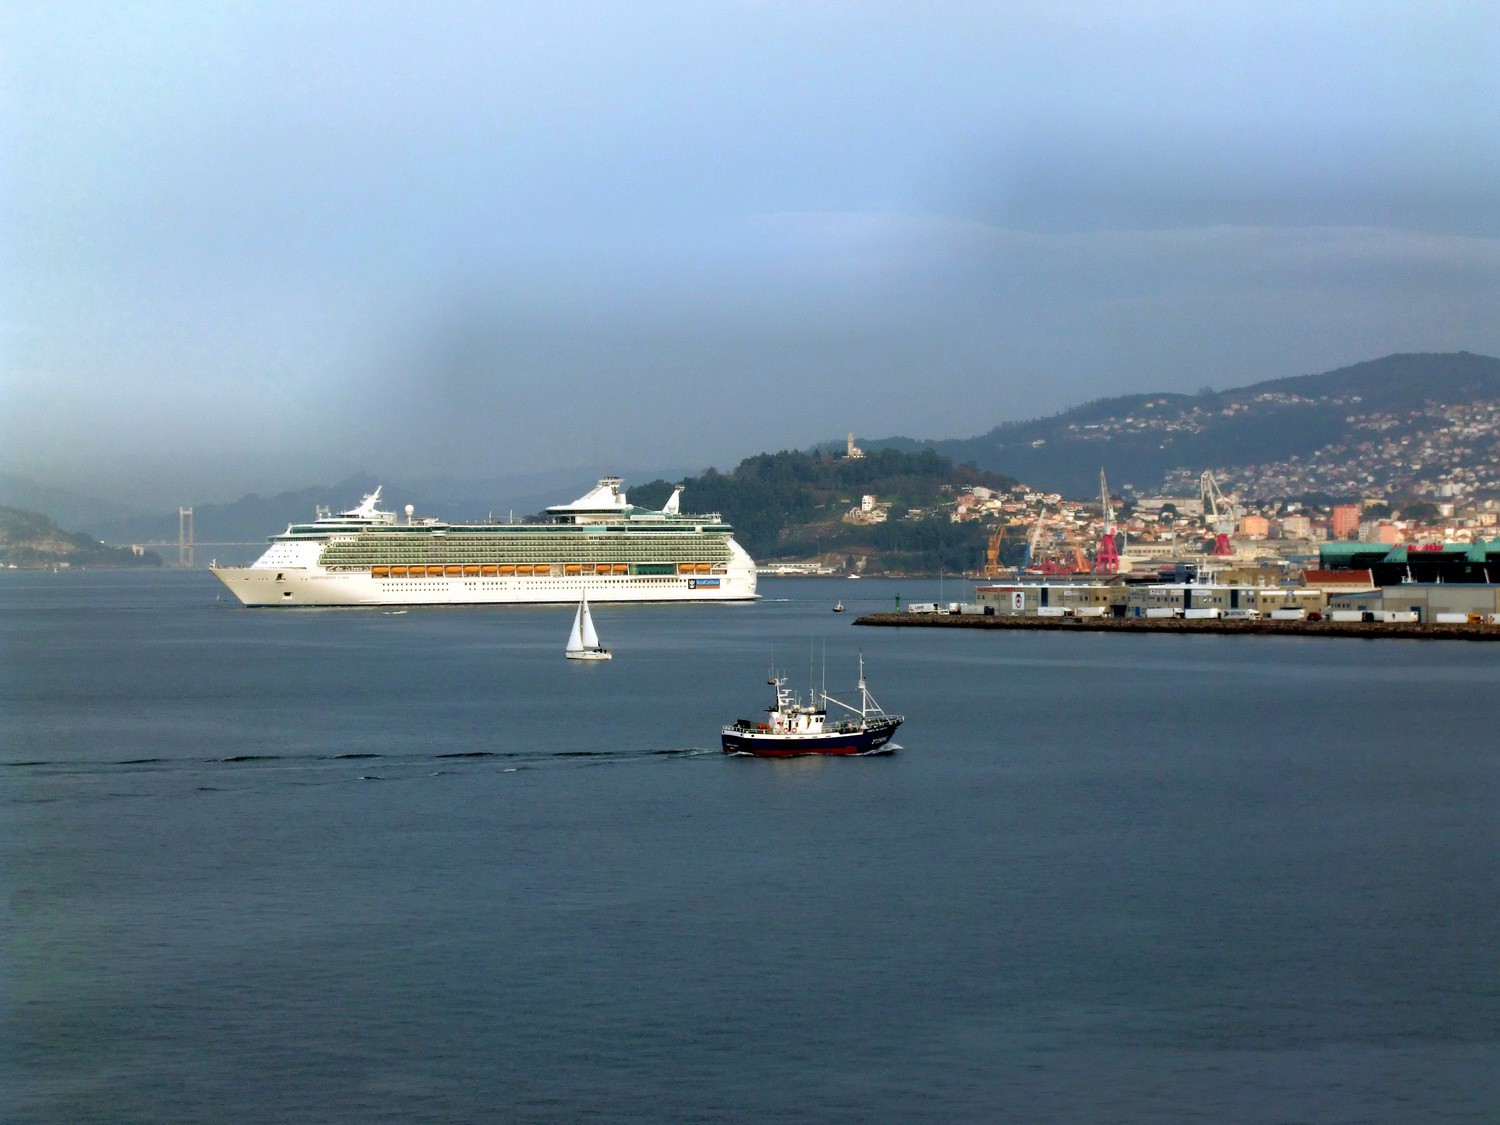 A little bit more comfortable vessel in the port of Vigo, but fur sure much more expensive!